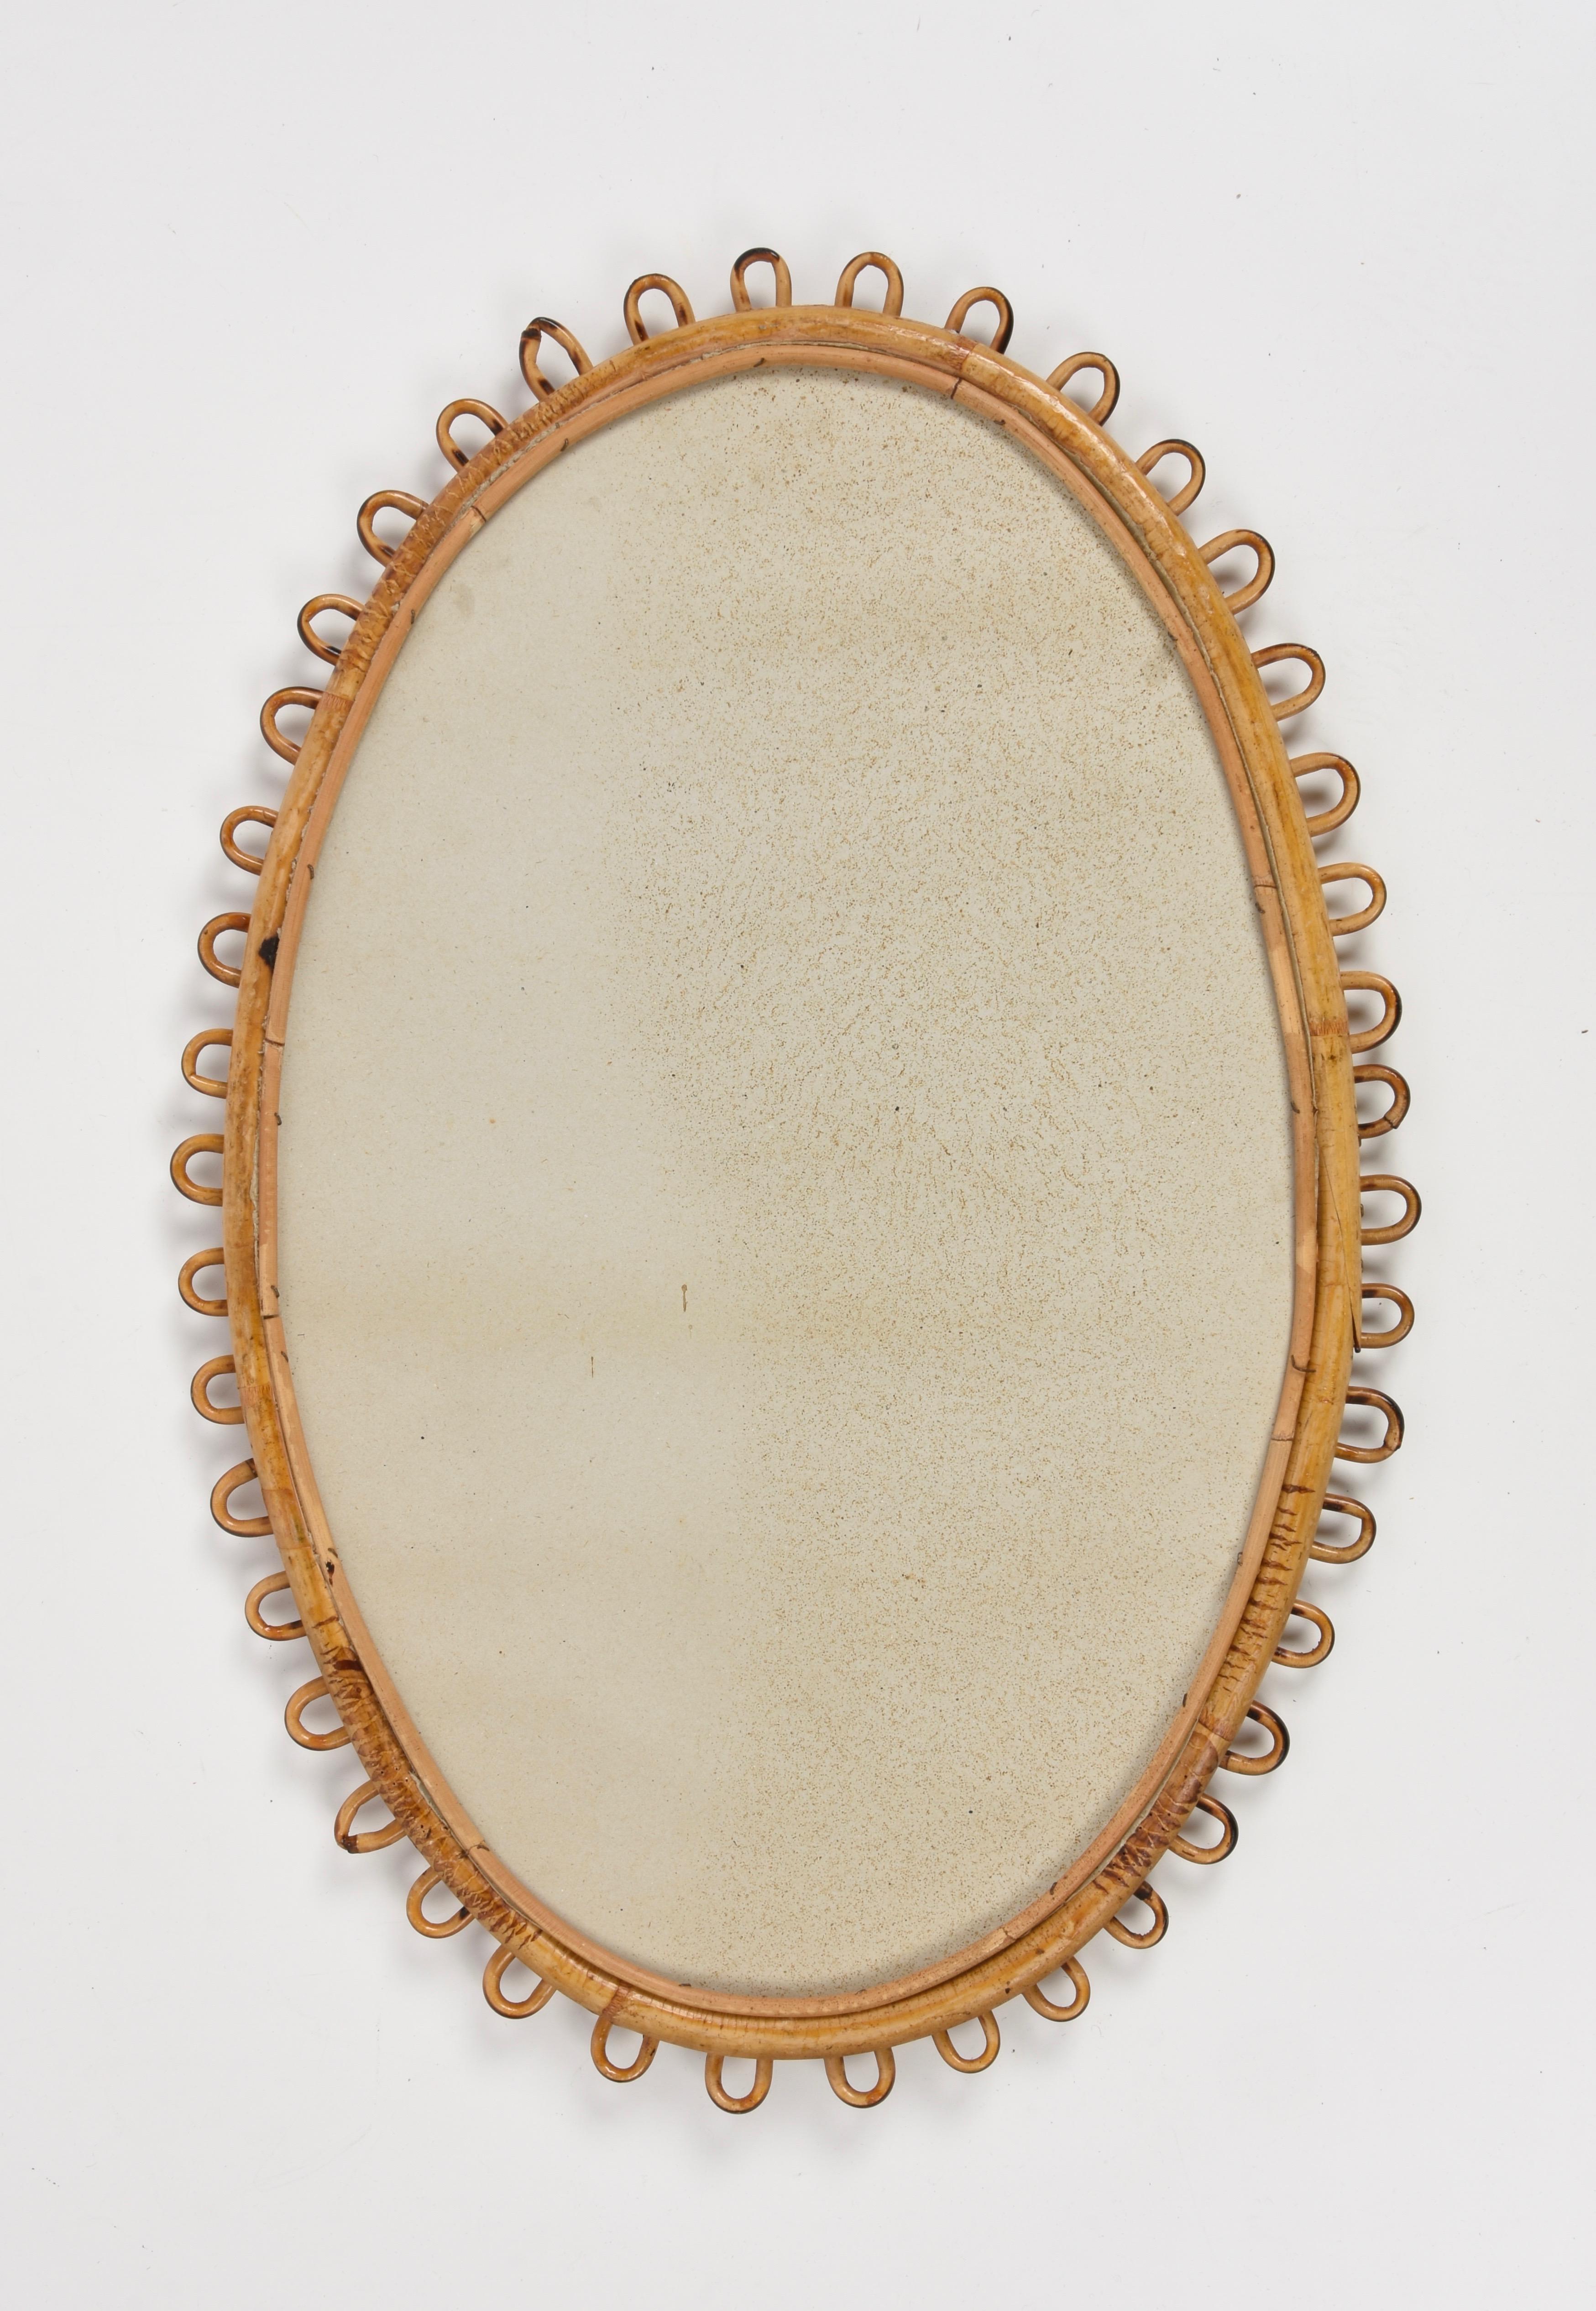 Midcentury decorative oval mirror with curved rattan beams and bamboo frame. This marvellous item was made in Italy during the 1950s.

This piece is unique as it has a sinusoidal rattan frame adding fine and elegant lines to its design.

The